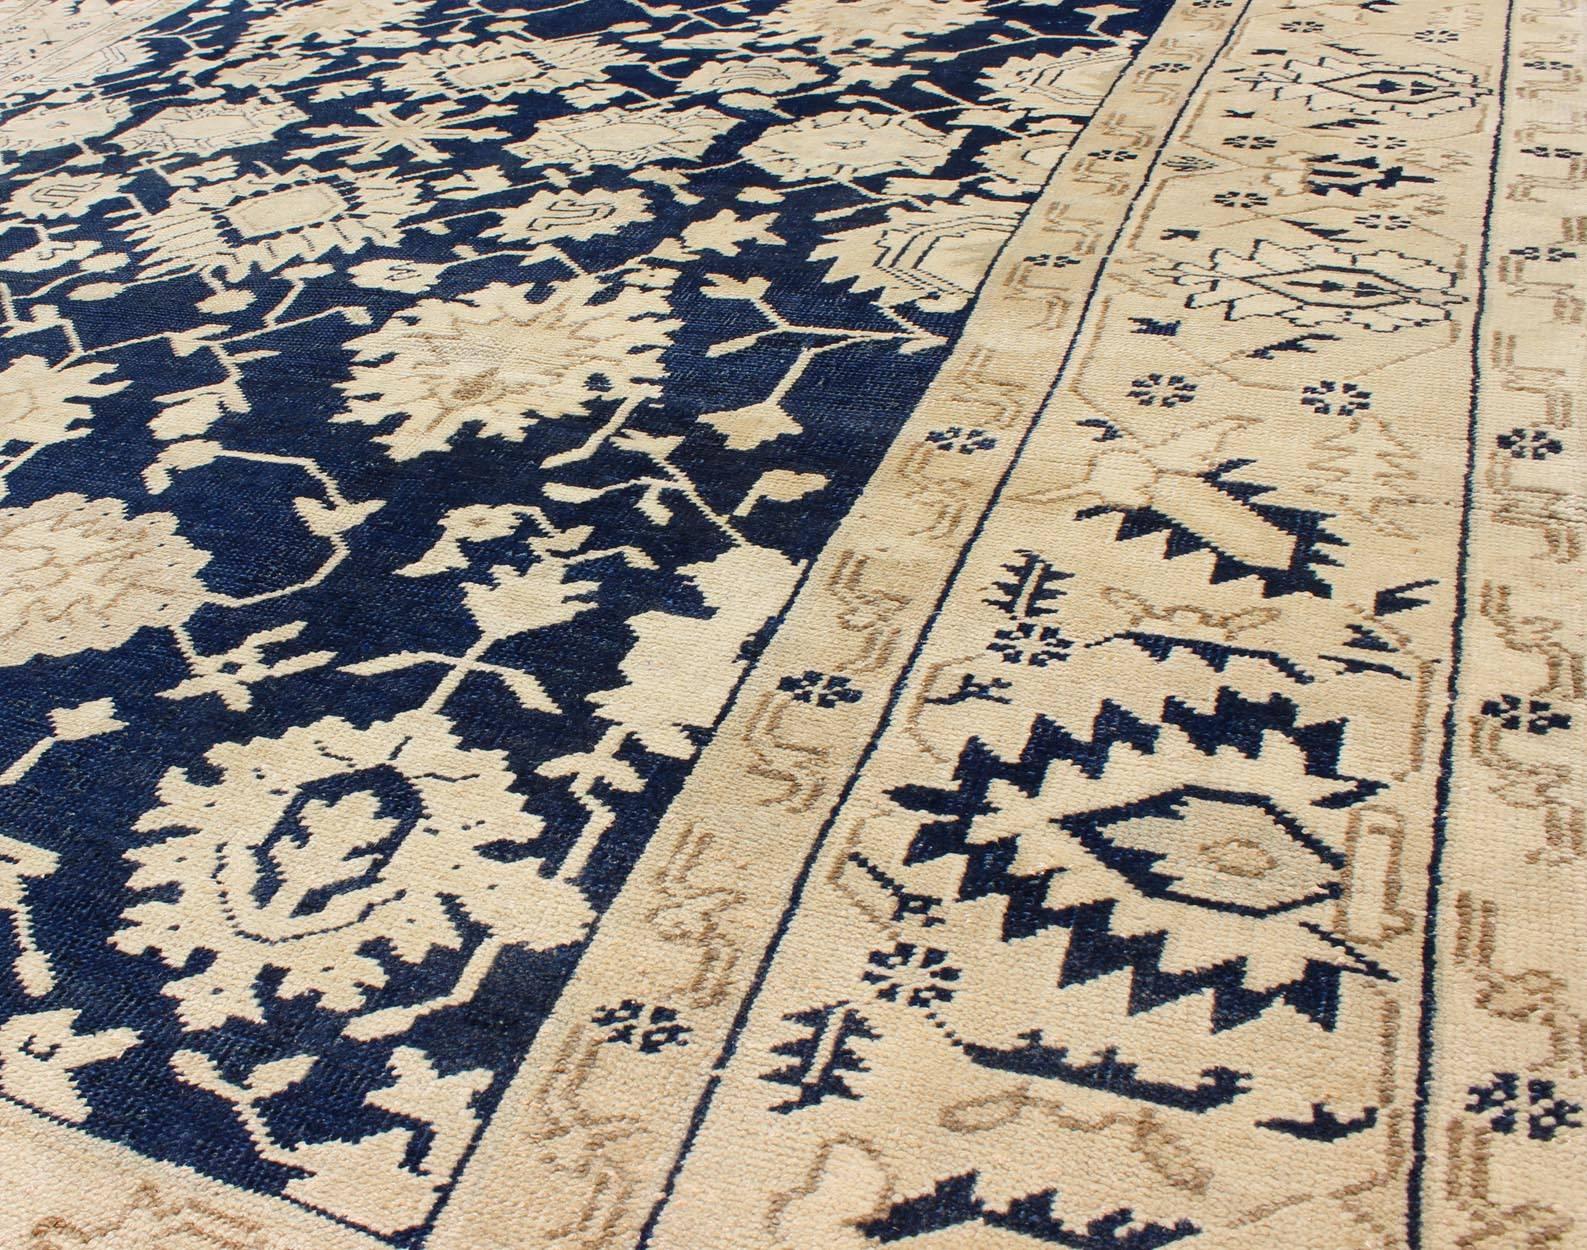 Unique Turkish Oushak Rug with Floral Design in Dark Blue, Cream and Light Brown In Excellent Condition For Sale In Atlanta, GA